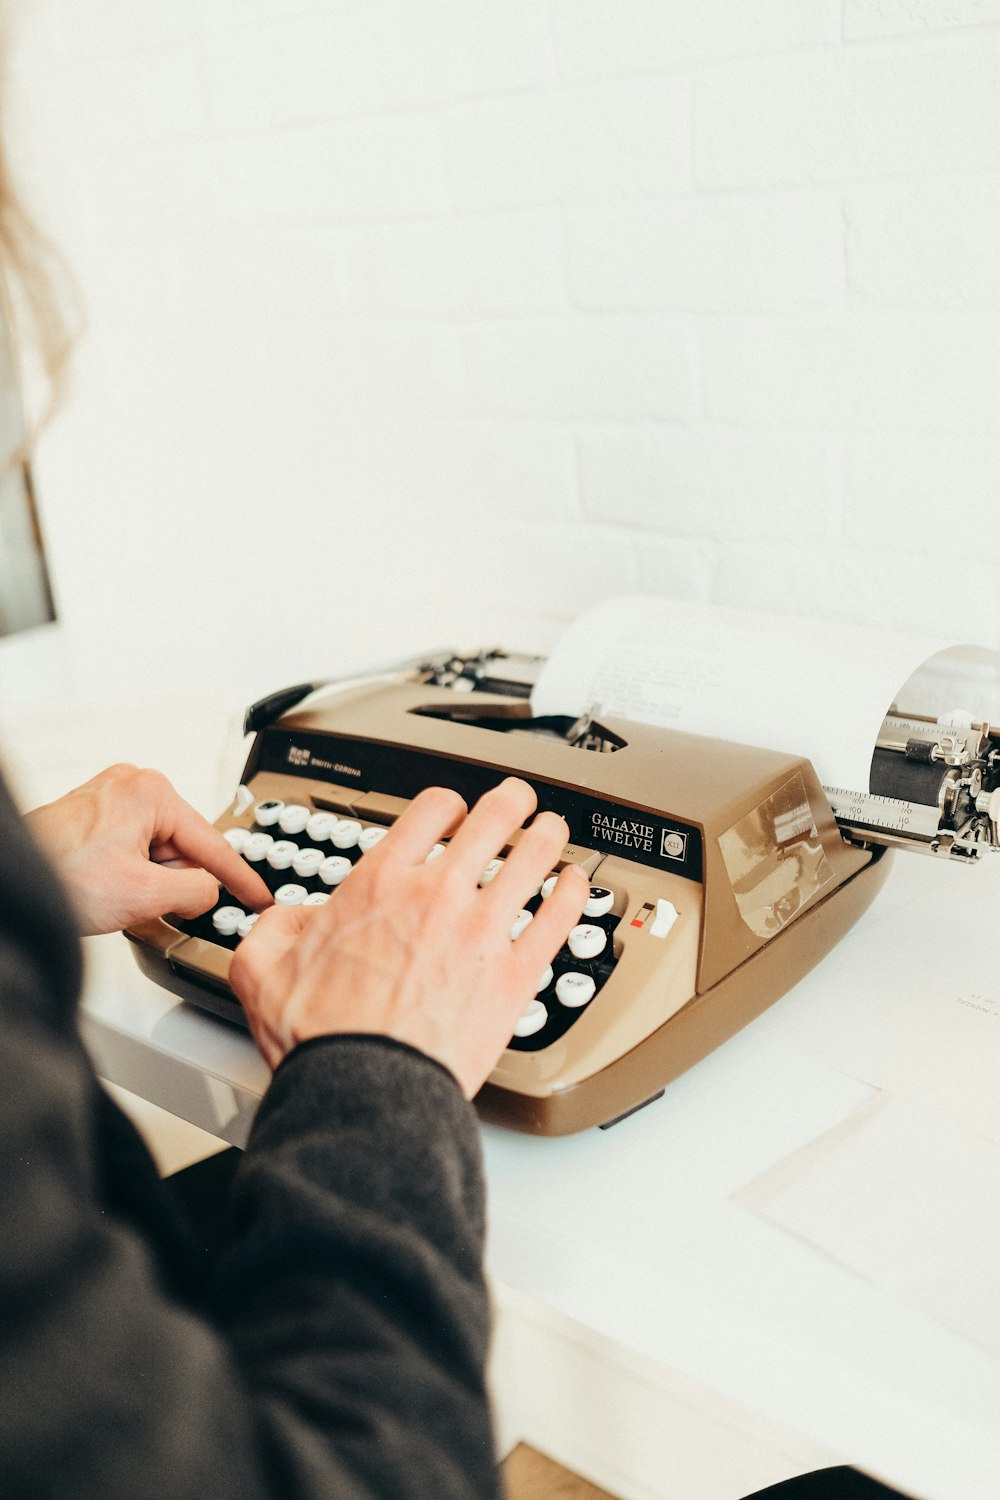 a person typing on an old fashioned typewriter